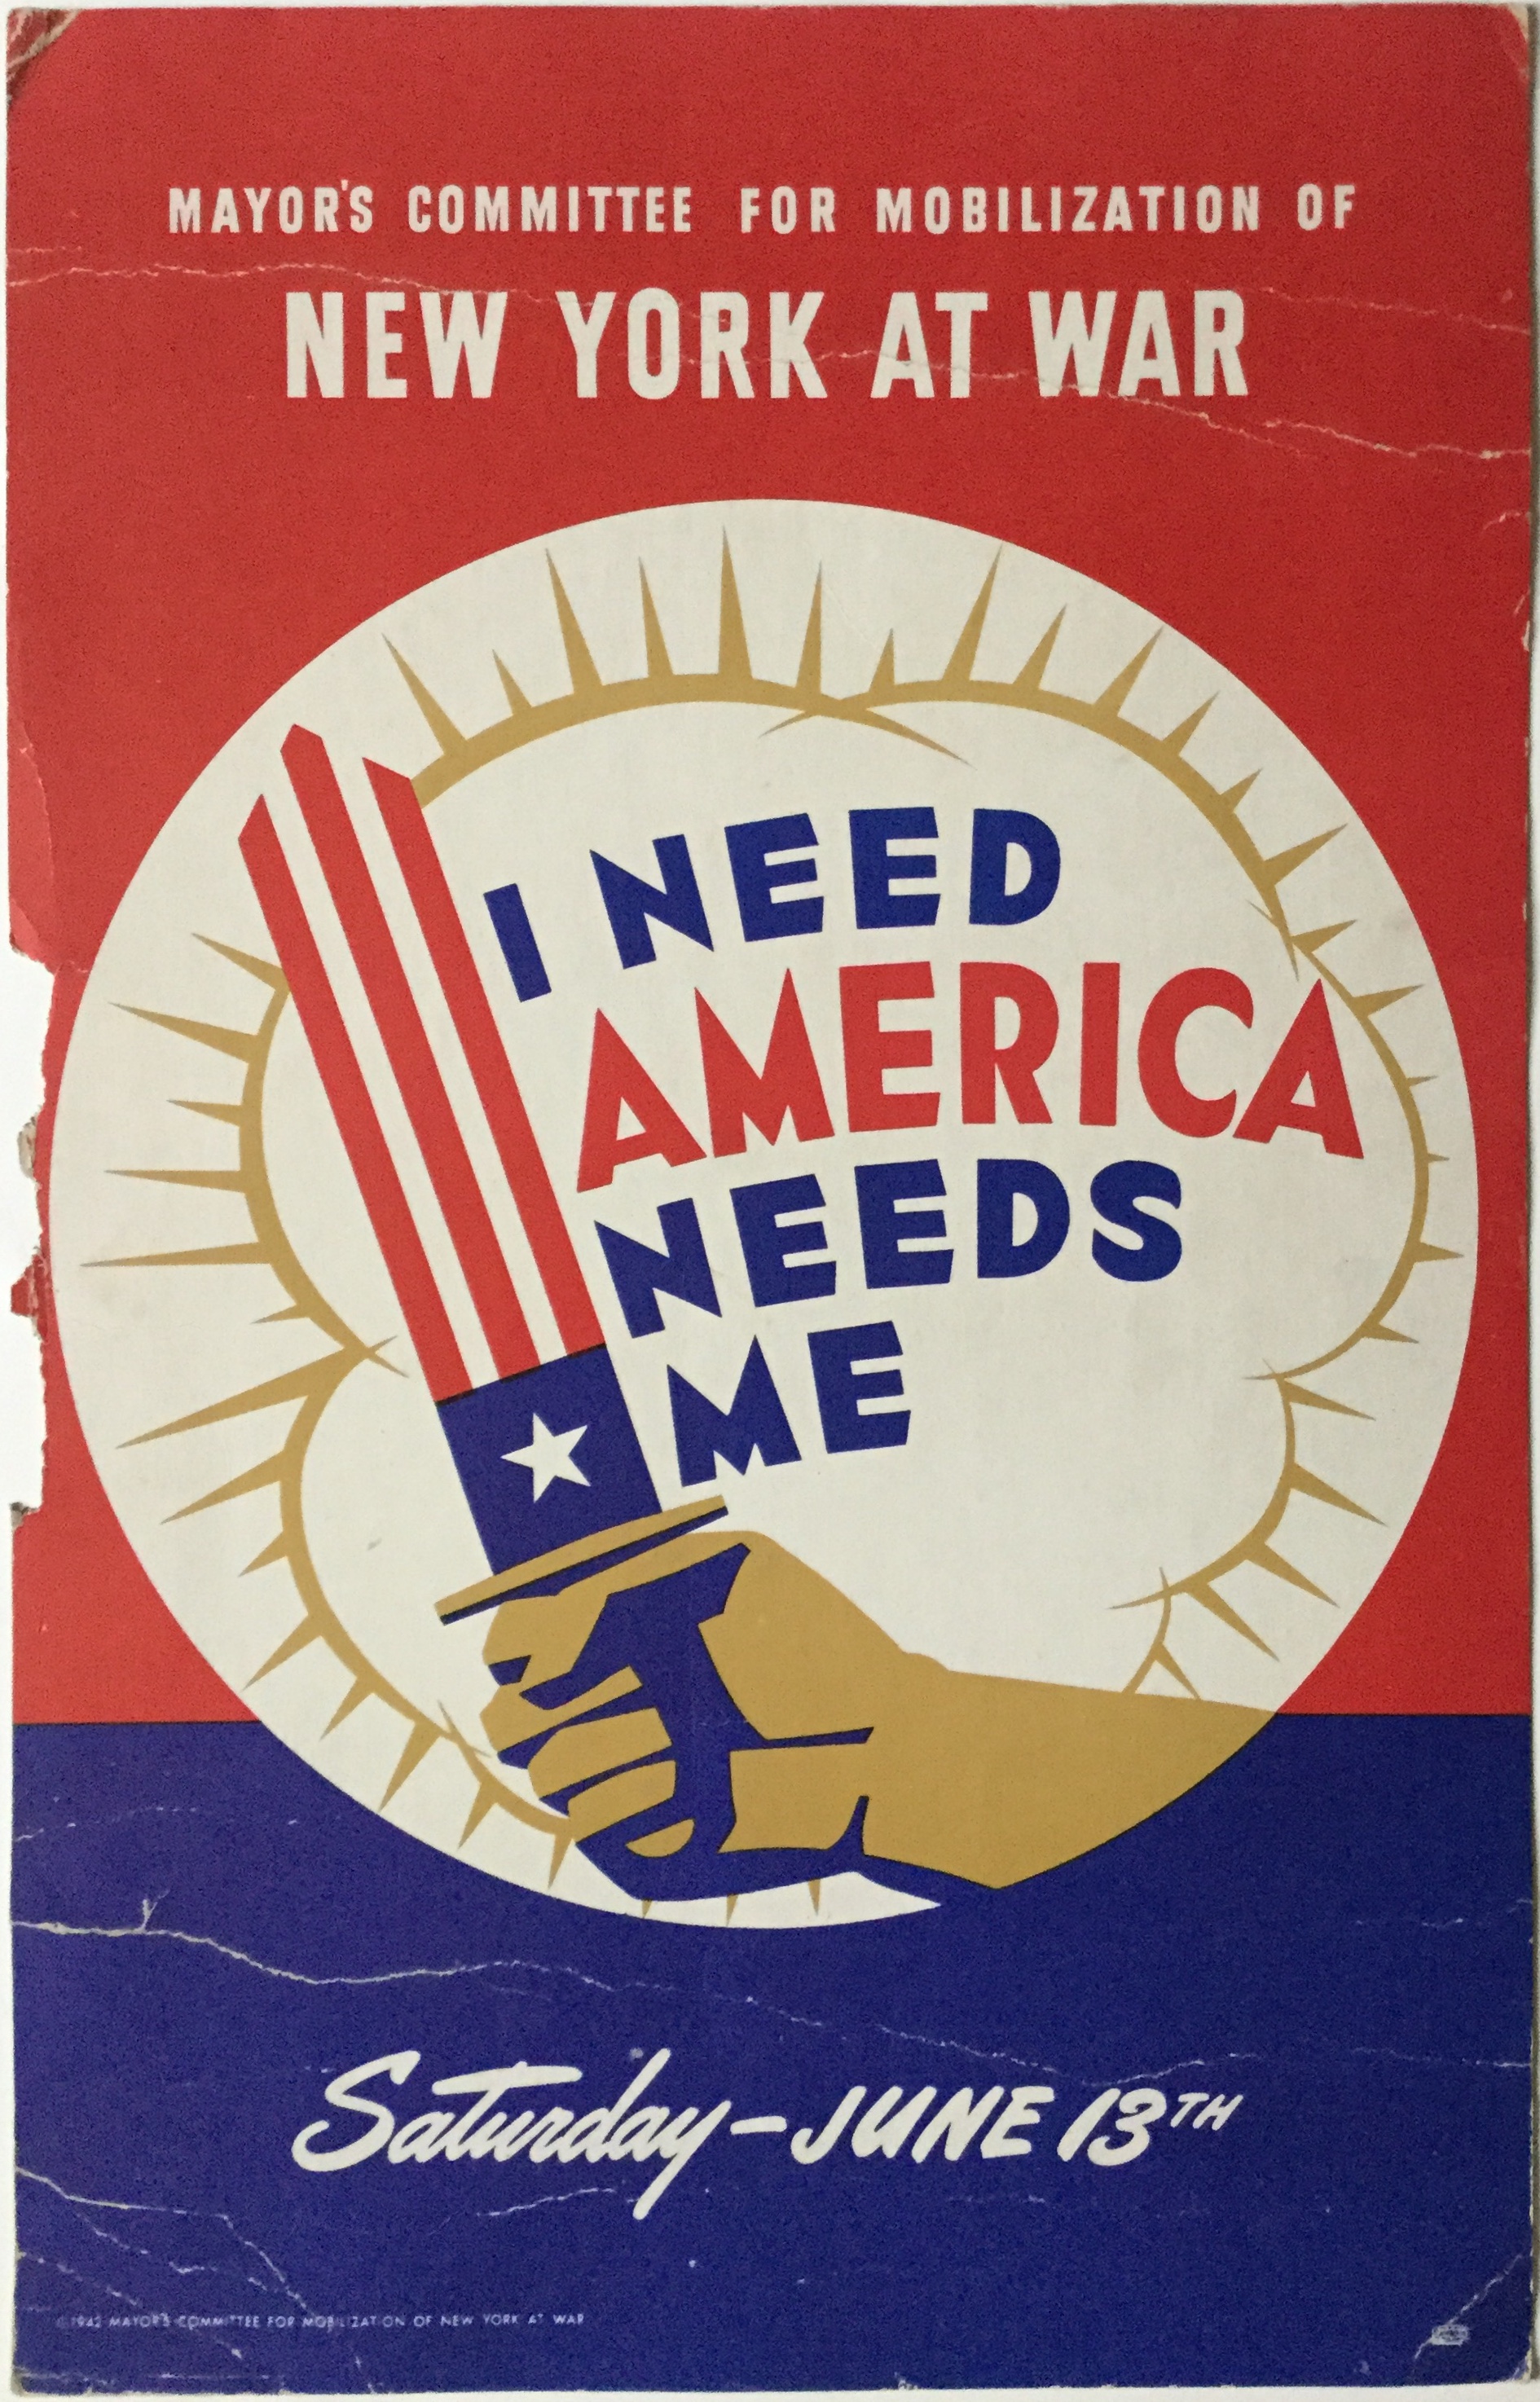 J404	I NEED AMERICA - AMERICA NEEDS ME - MAYOR’S COMMITTEE FOR MOBILIZATION OF NEW YORK AT WAR - SATURDAY - JUNE 13th (1942)